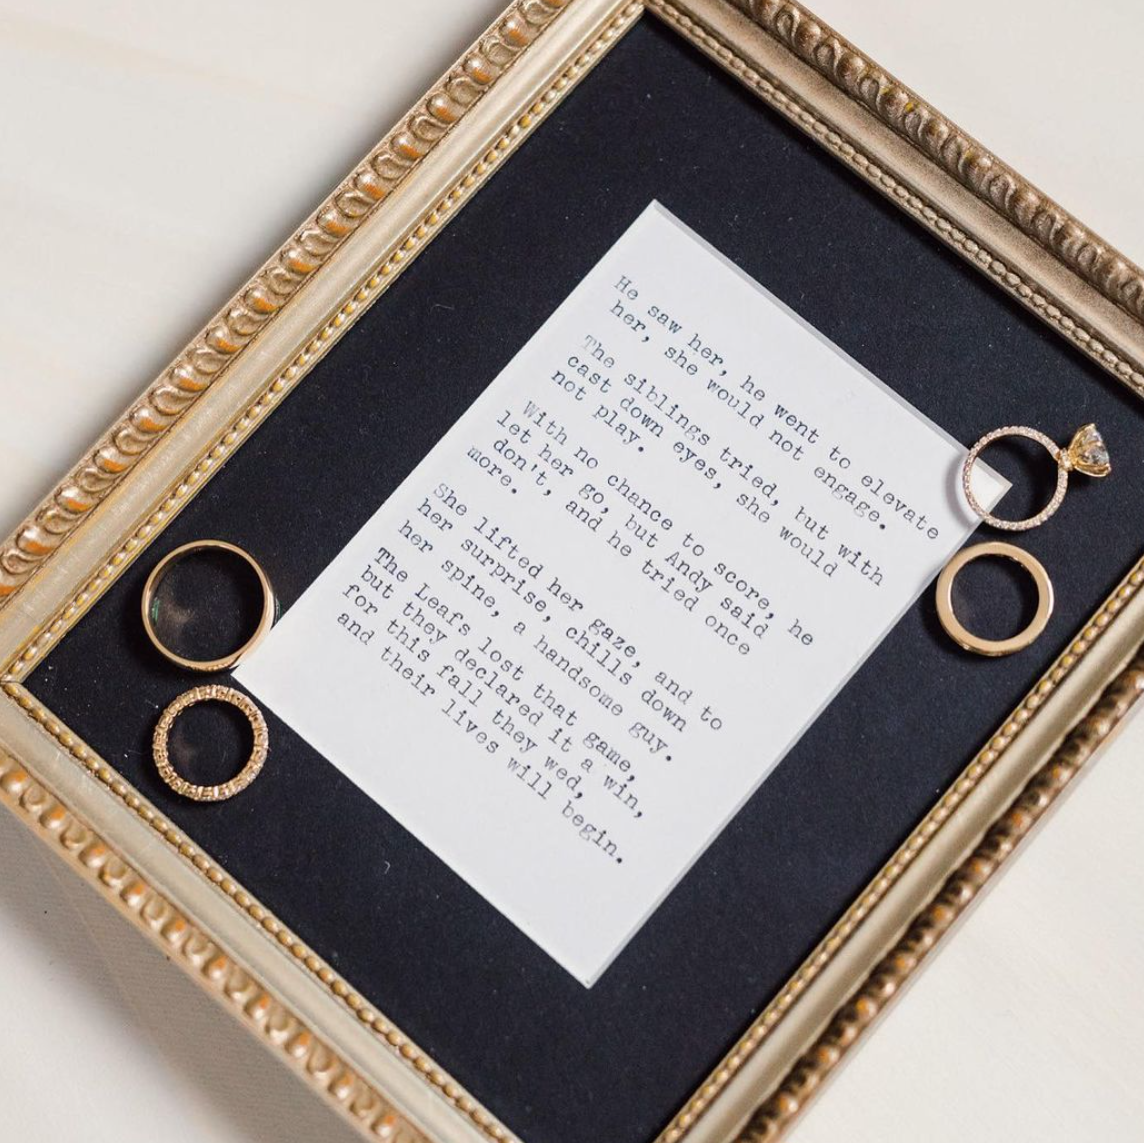 typewriter poem in frame custom written for a couple getting married. personalized poetry for vows and wedding reception entertainment